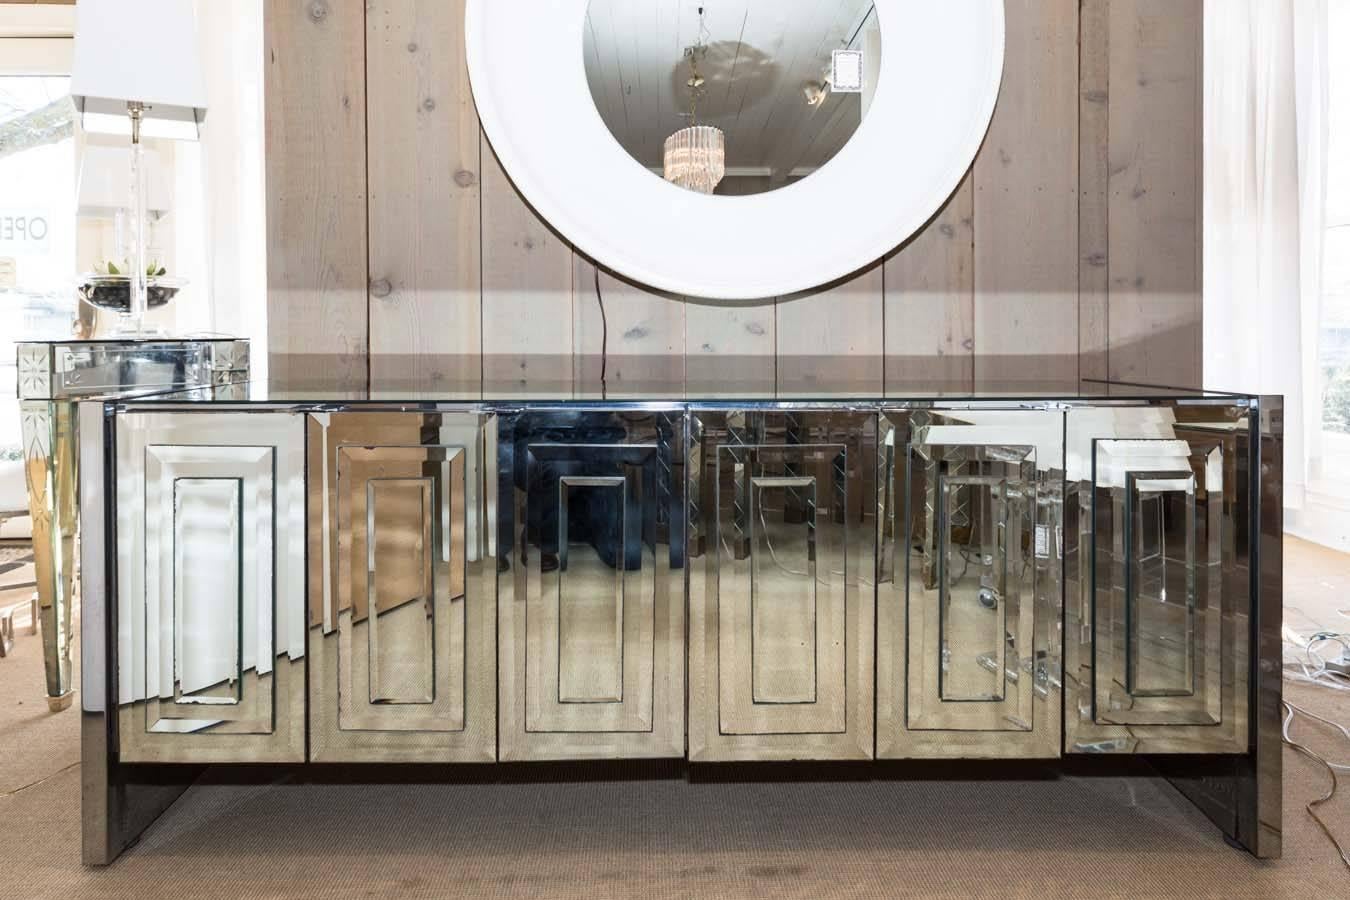 Fabulous Ello six-door mirrored credenza. There is one single door and one double door on each side. Opening the doors reveals three drawers on each side which is quite rare for this Ello piece.